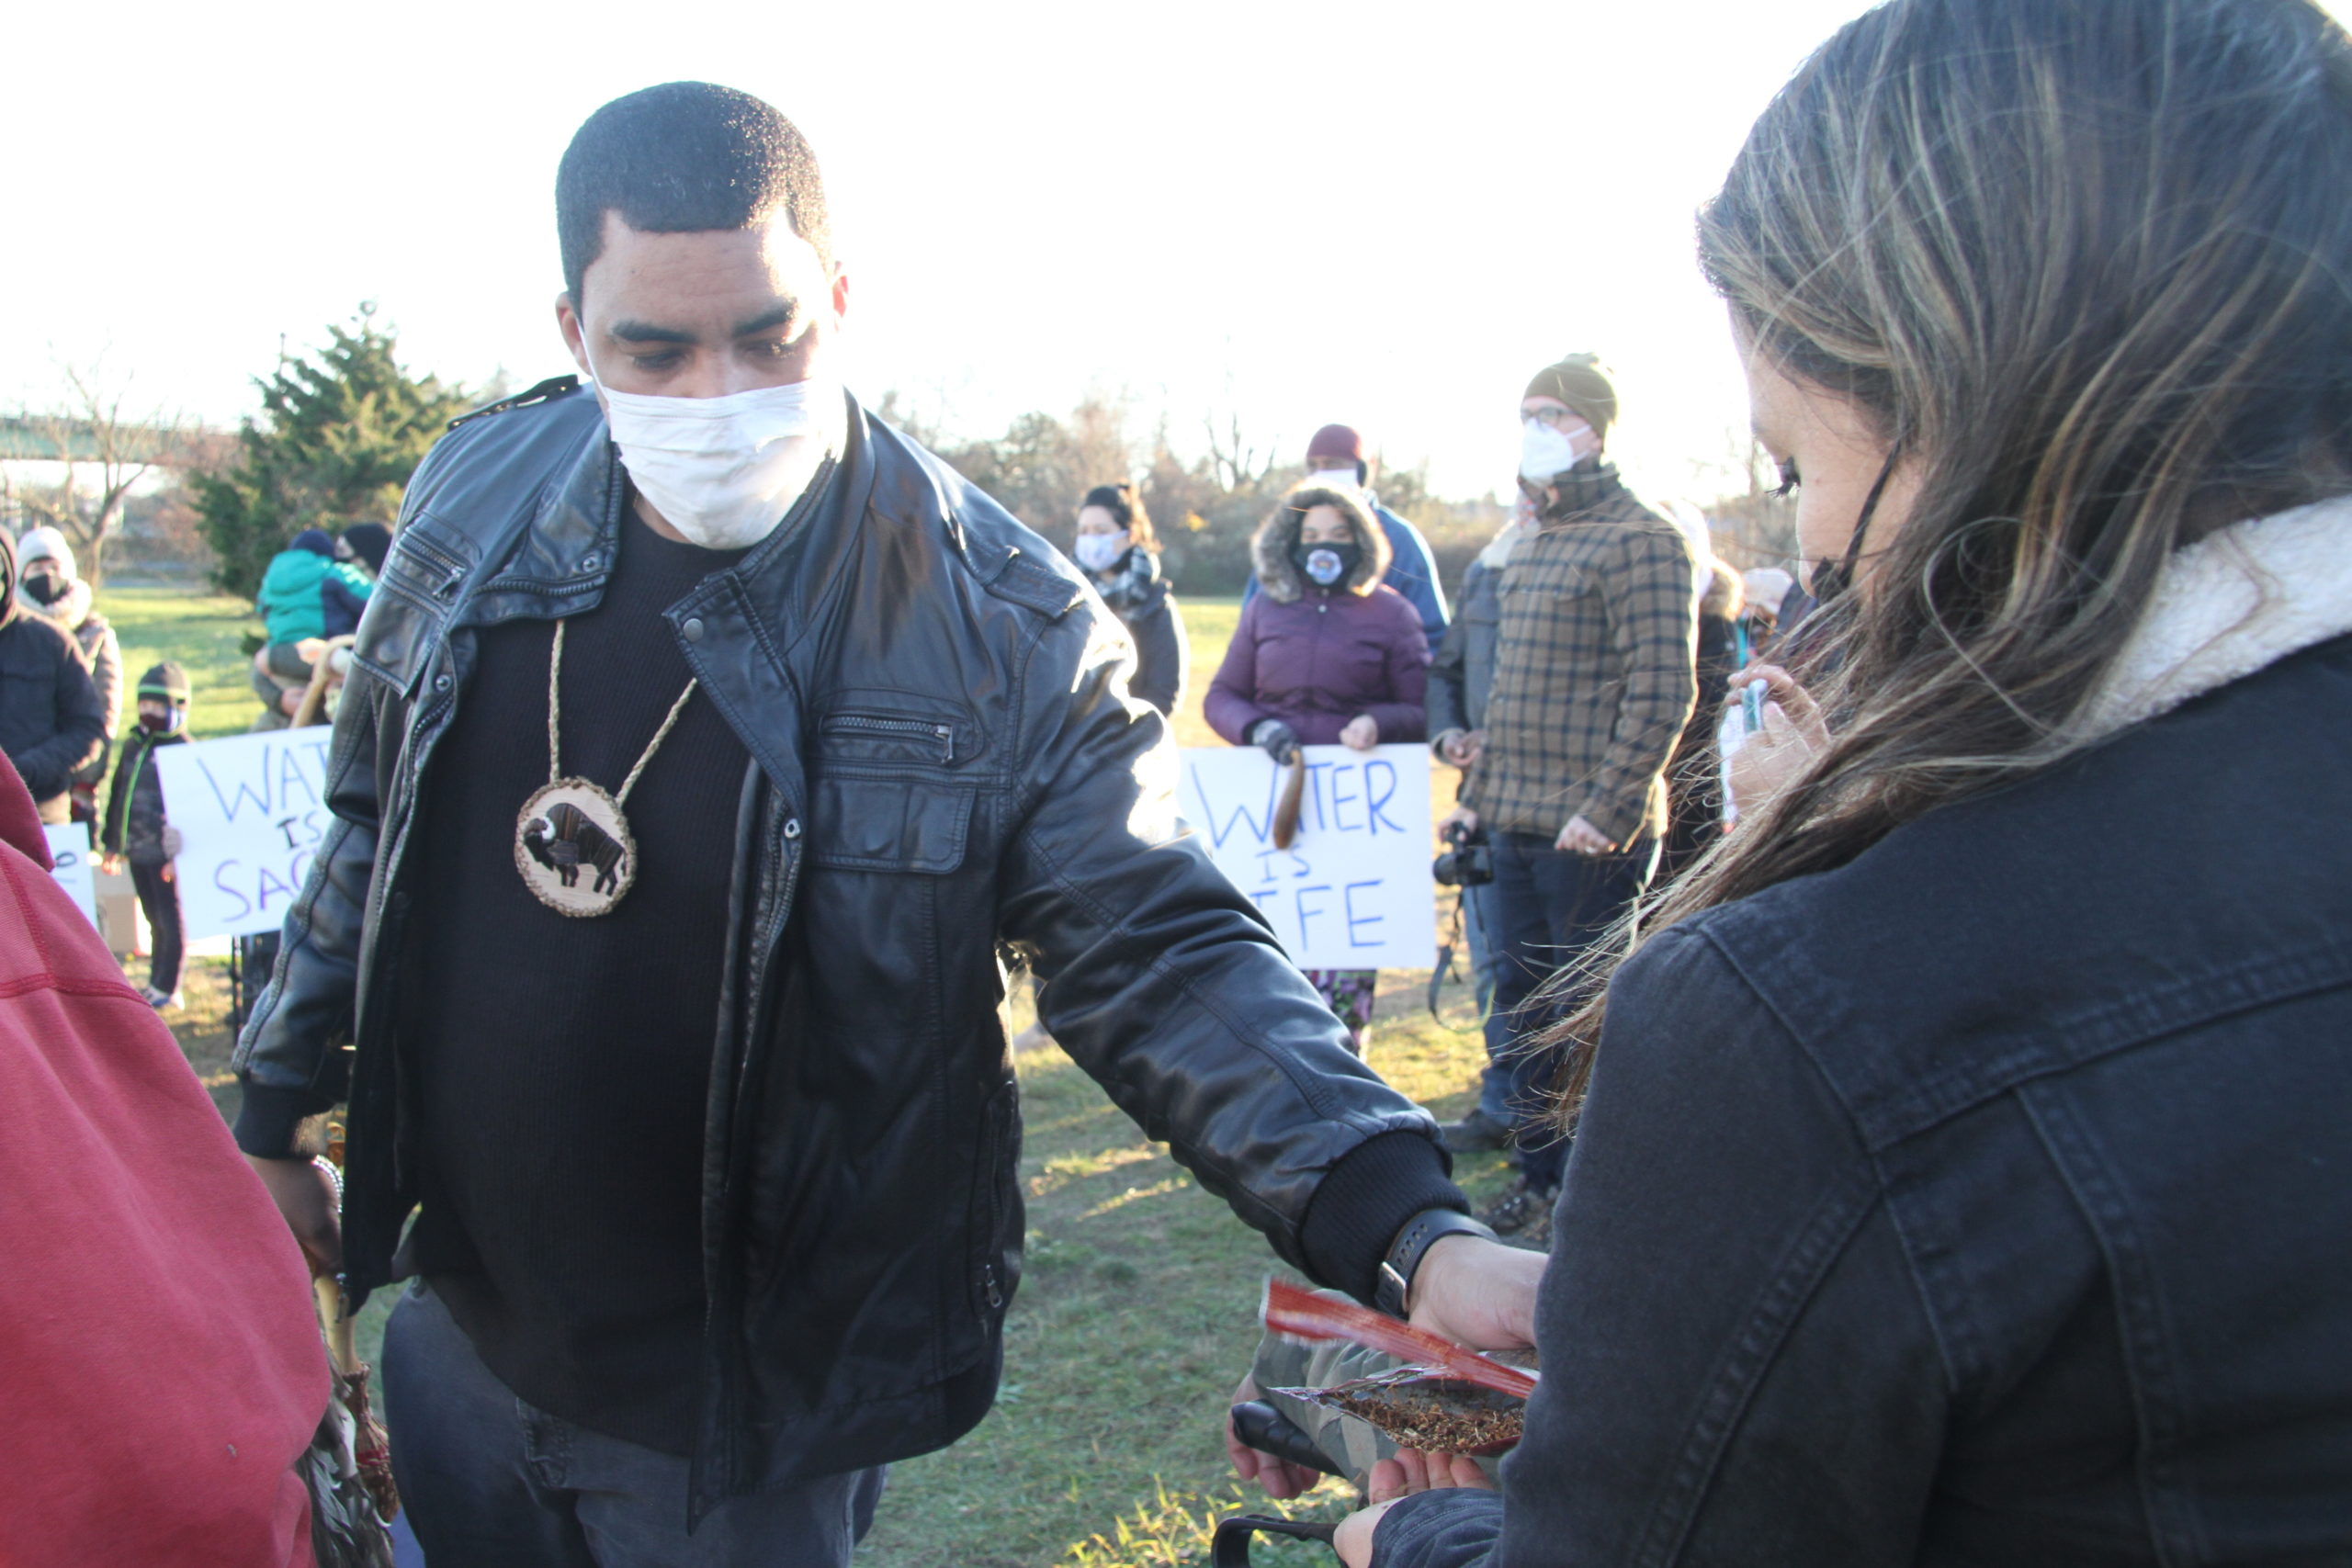 Members of the Shinnecock Nation and dozens of supporters from other tribes, environmental groups and social justice organizations gathered on the banks of the Shinnecock Canal on Sunday afternoon to pray and protest overdevelopment in the region and the impacts humans have had on water quality in the region. 